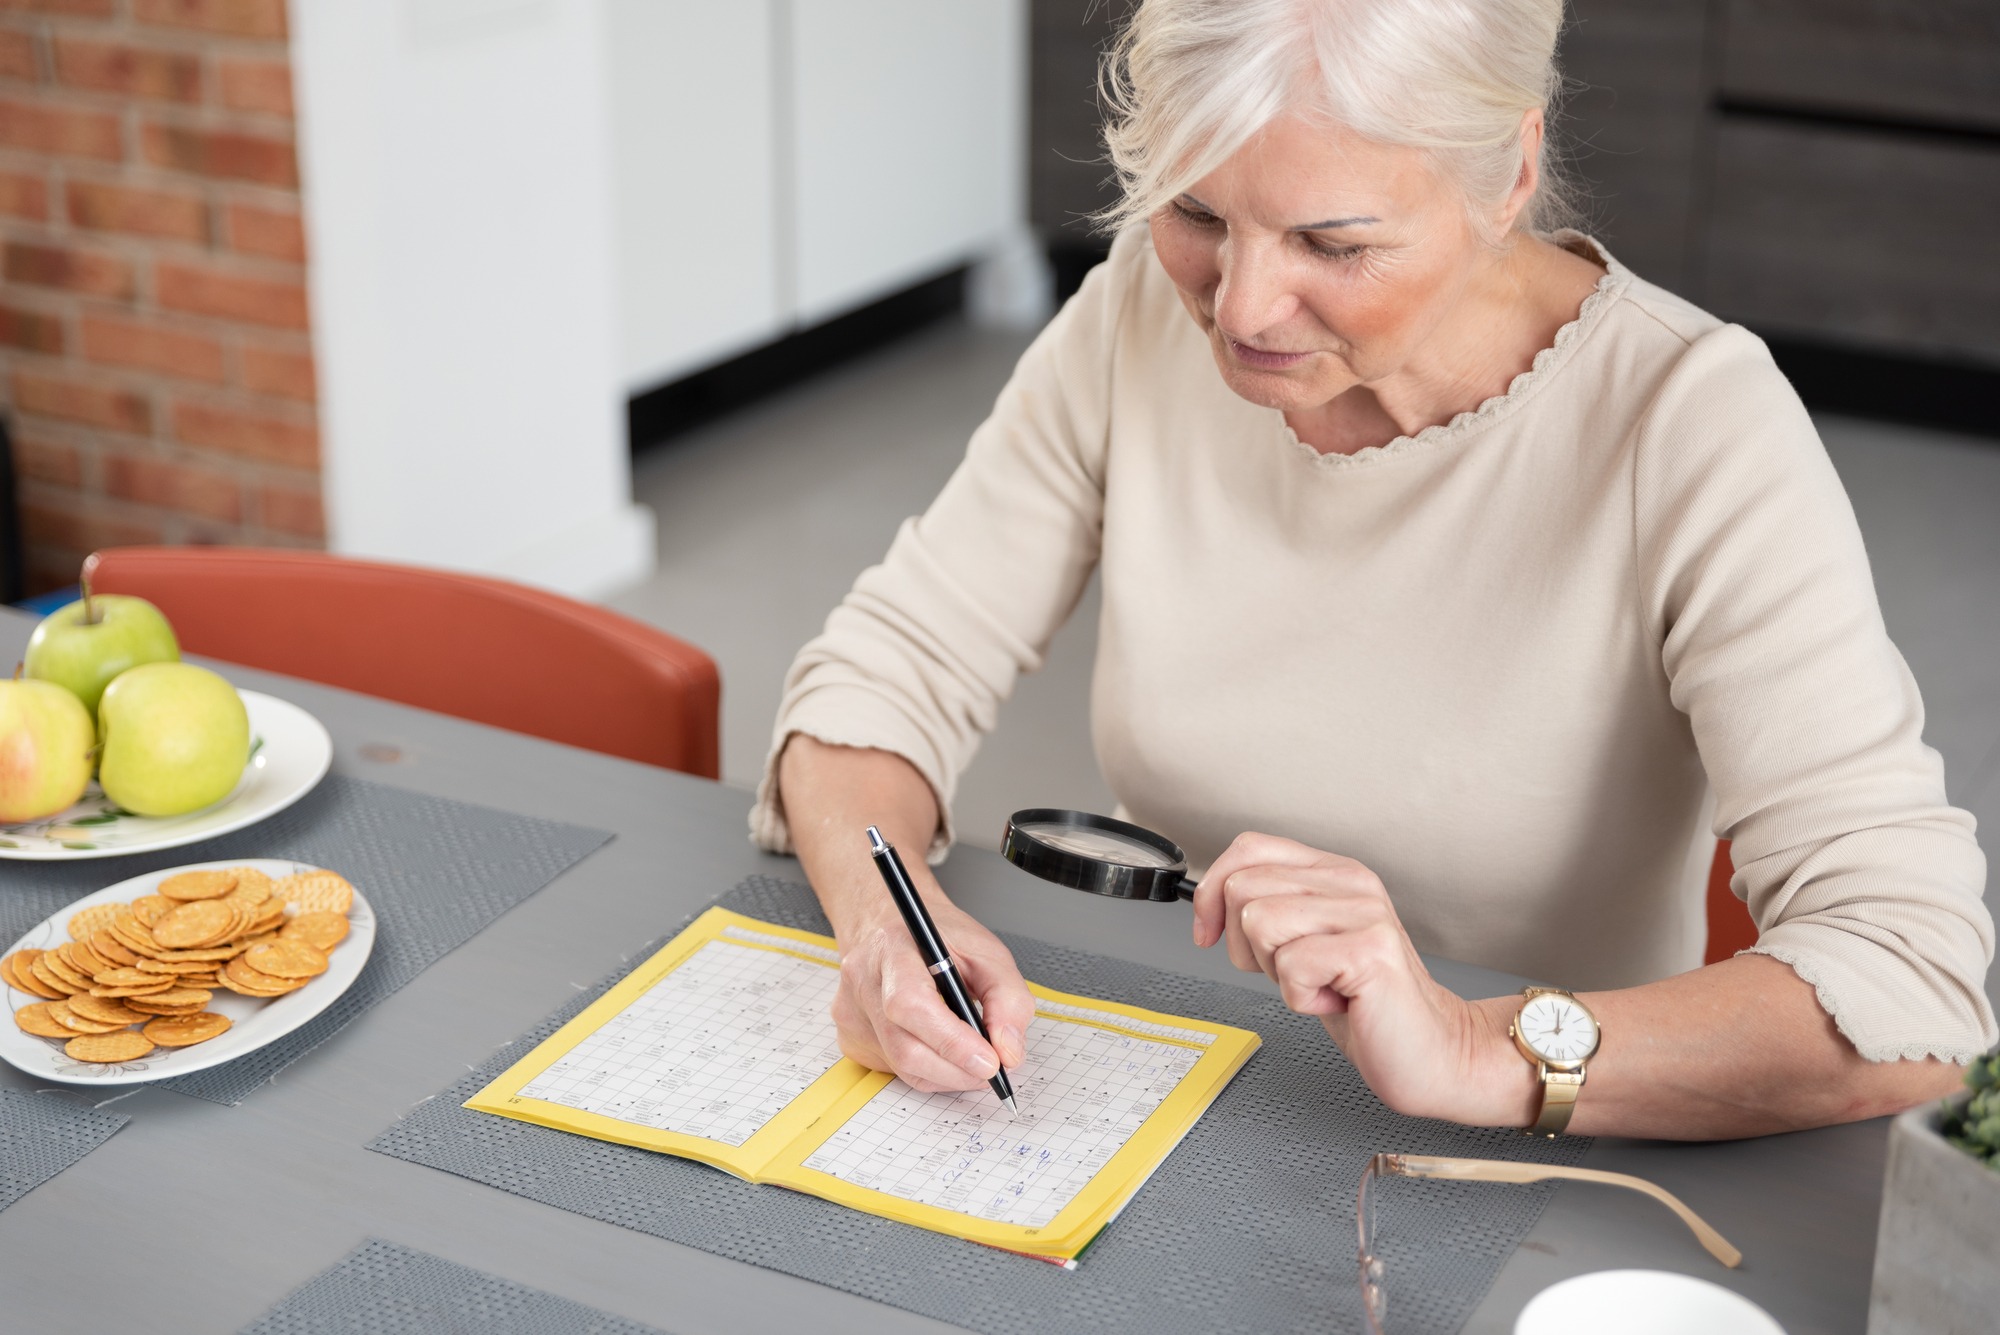 Woman enjoys solving a crossword puzzle at home